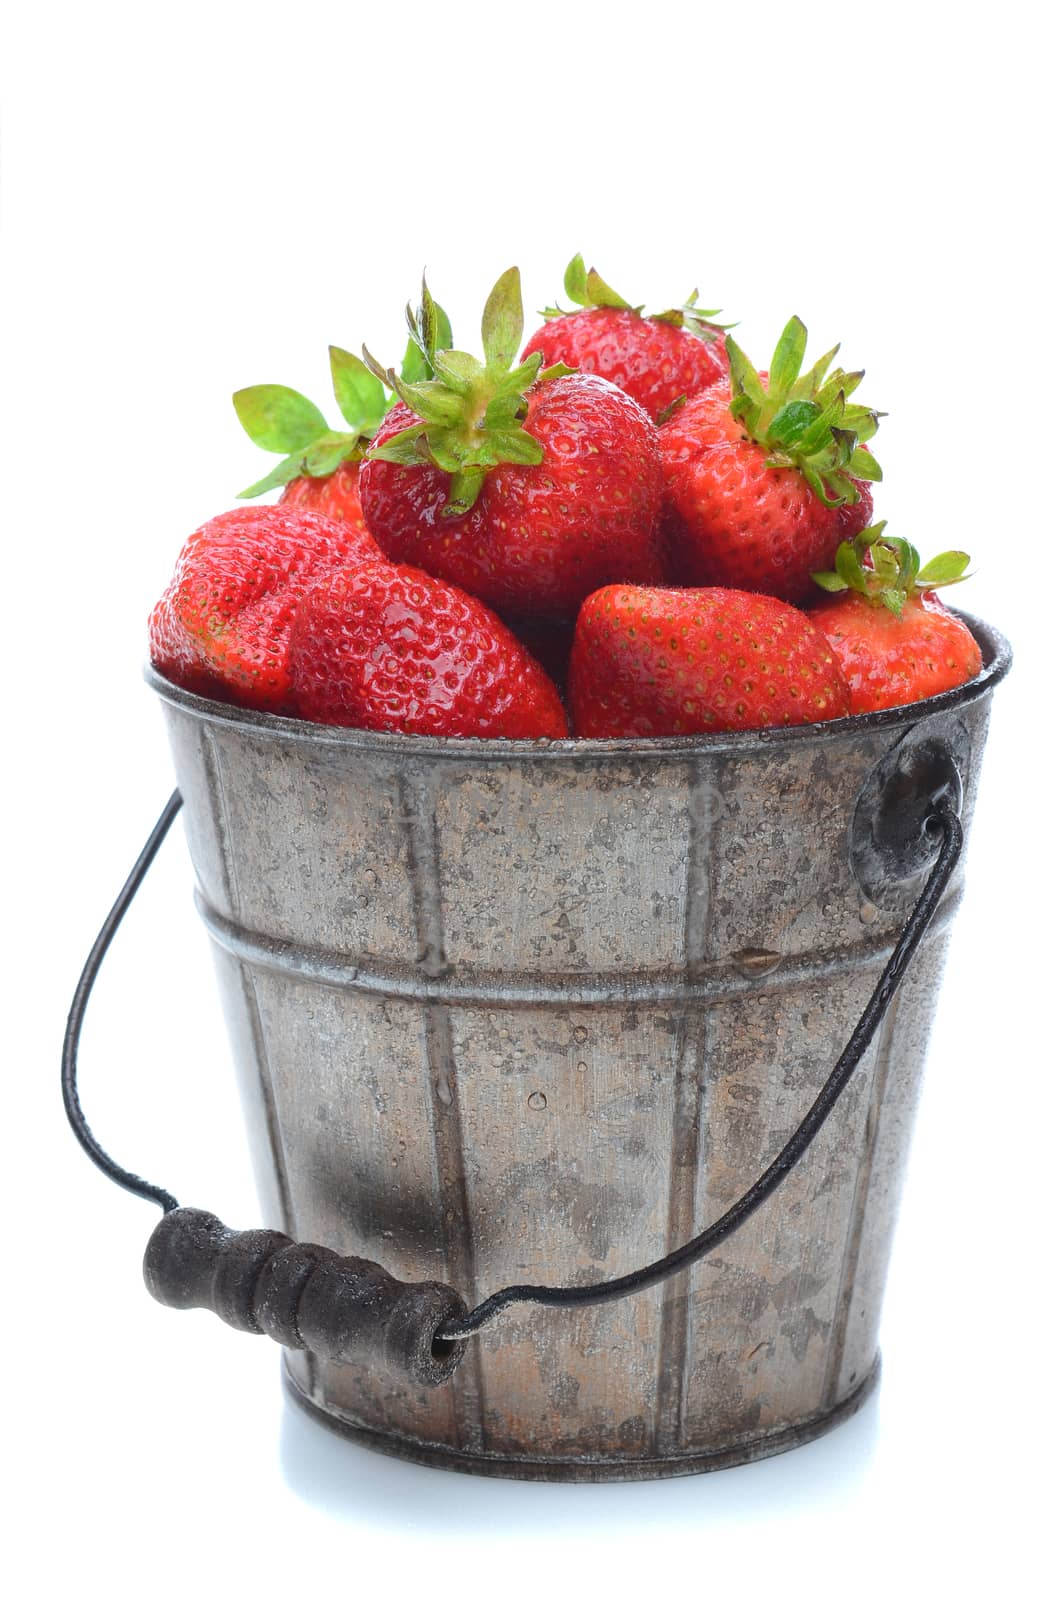 A pail full of freshly picked strawberries. Vertical format isolated on a white background with slight reflection.